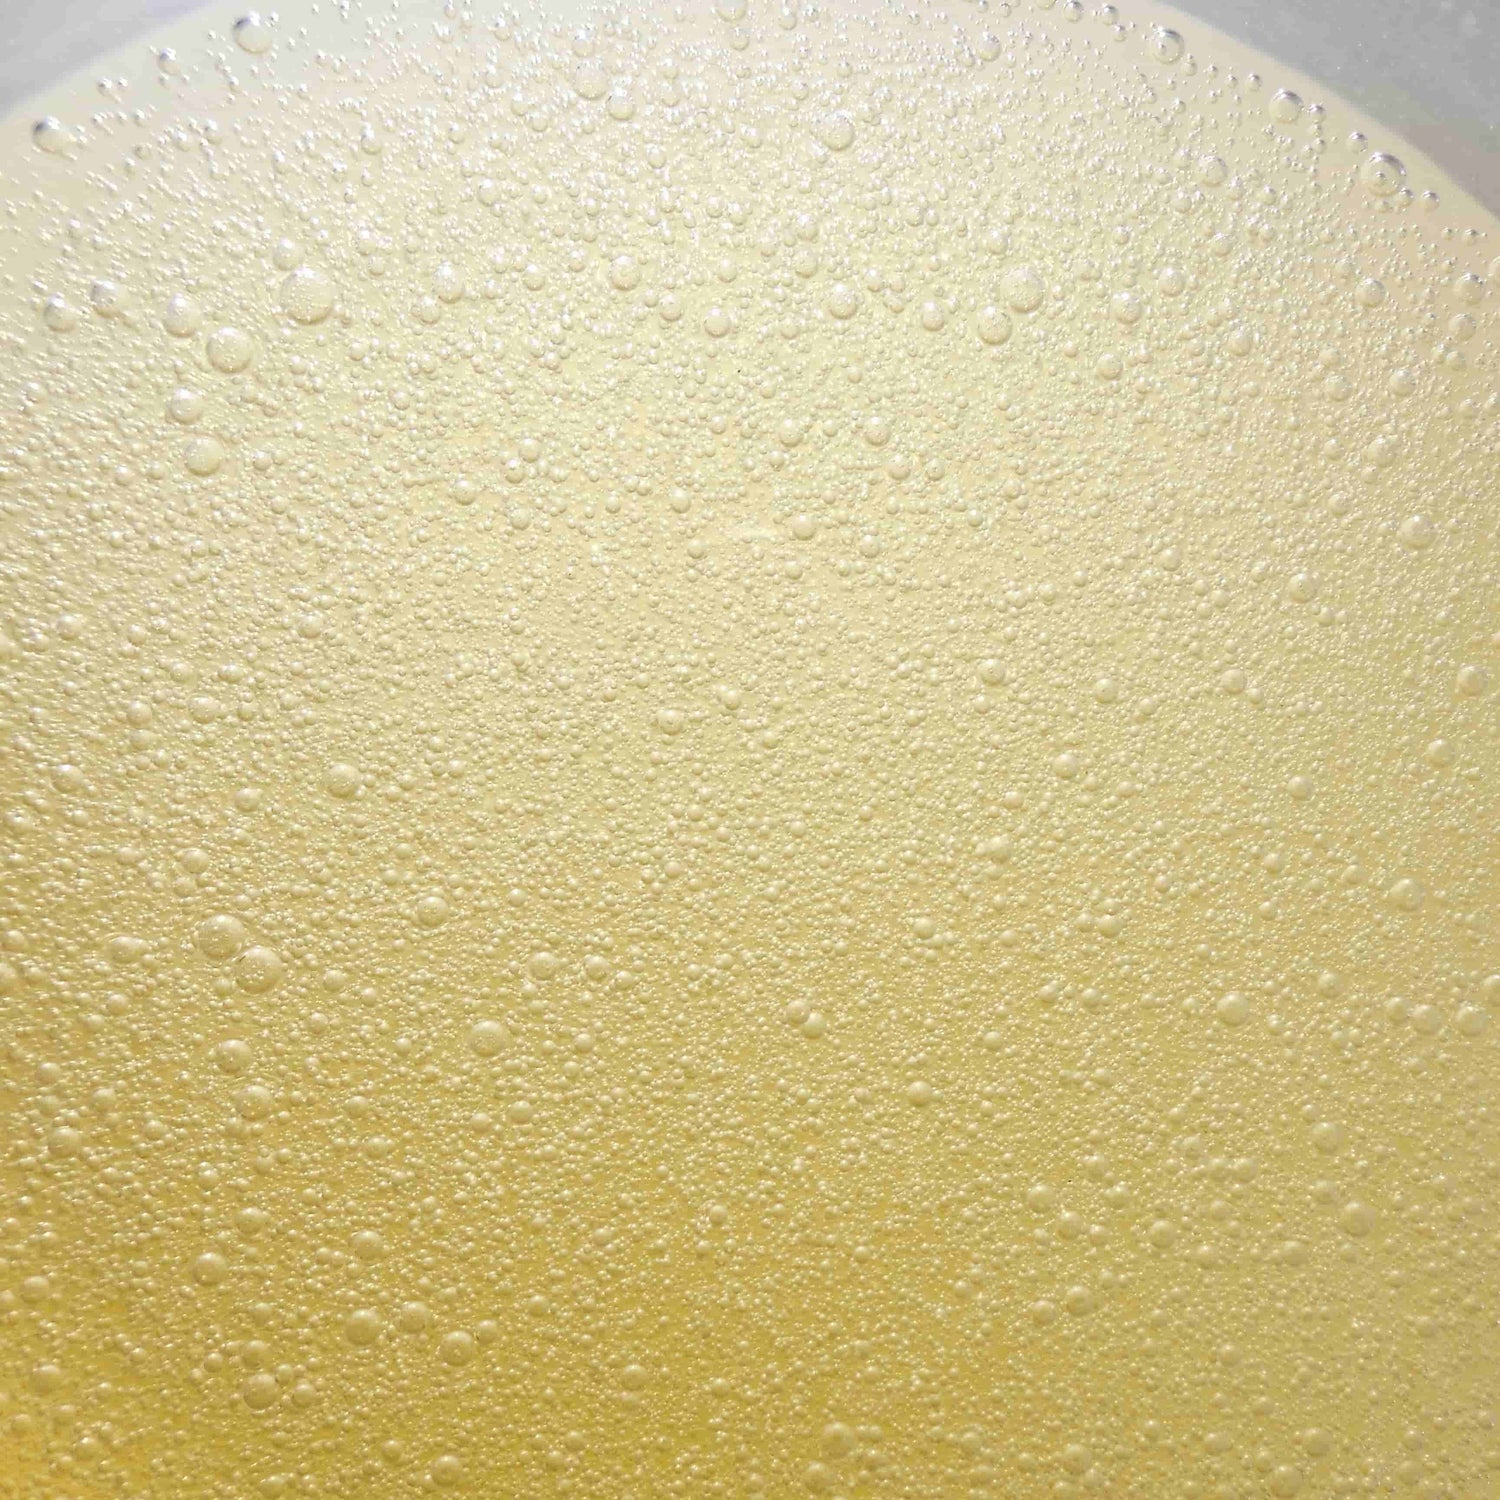 Bright yellow clear bubbles oil gel with light going through it texture photo skincare oil 